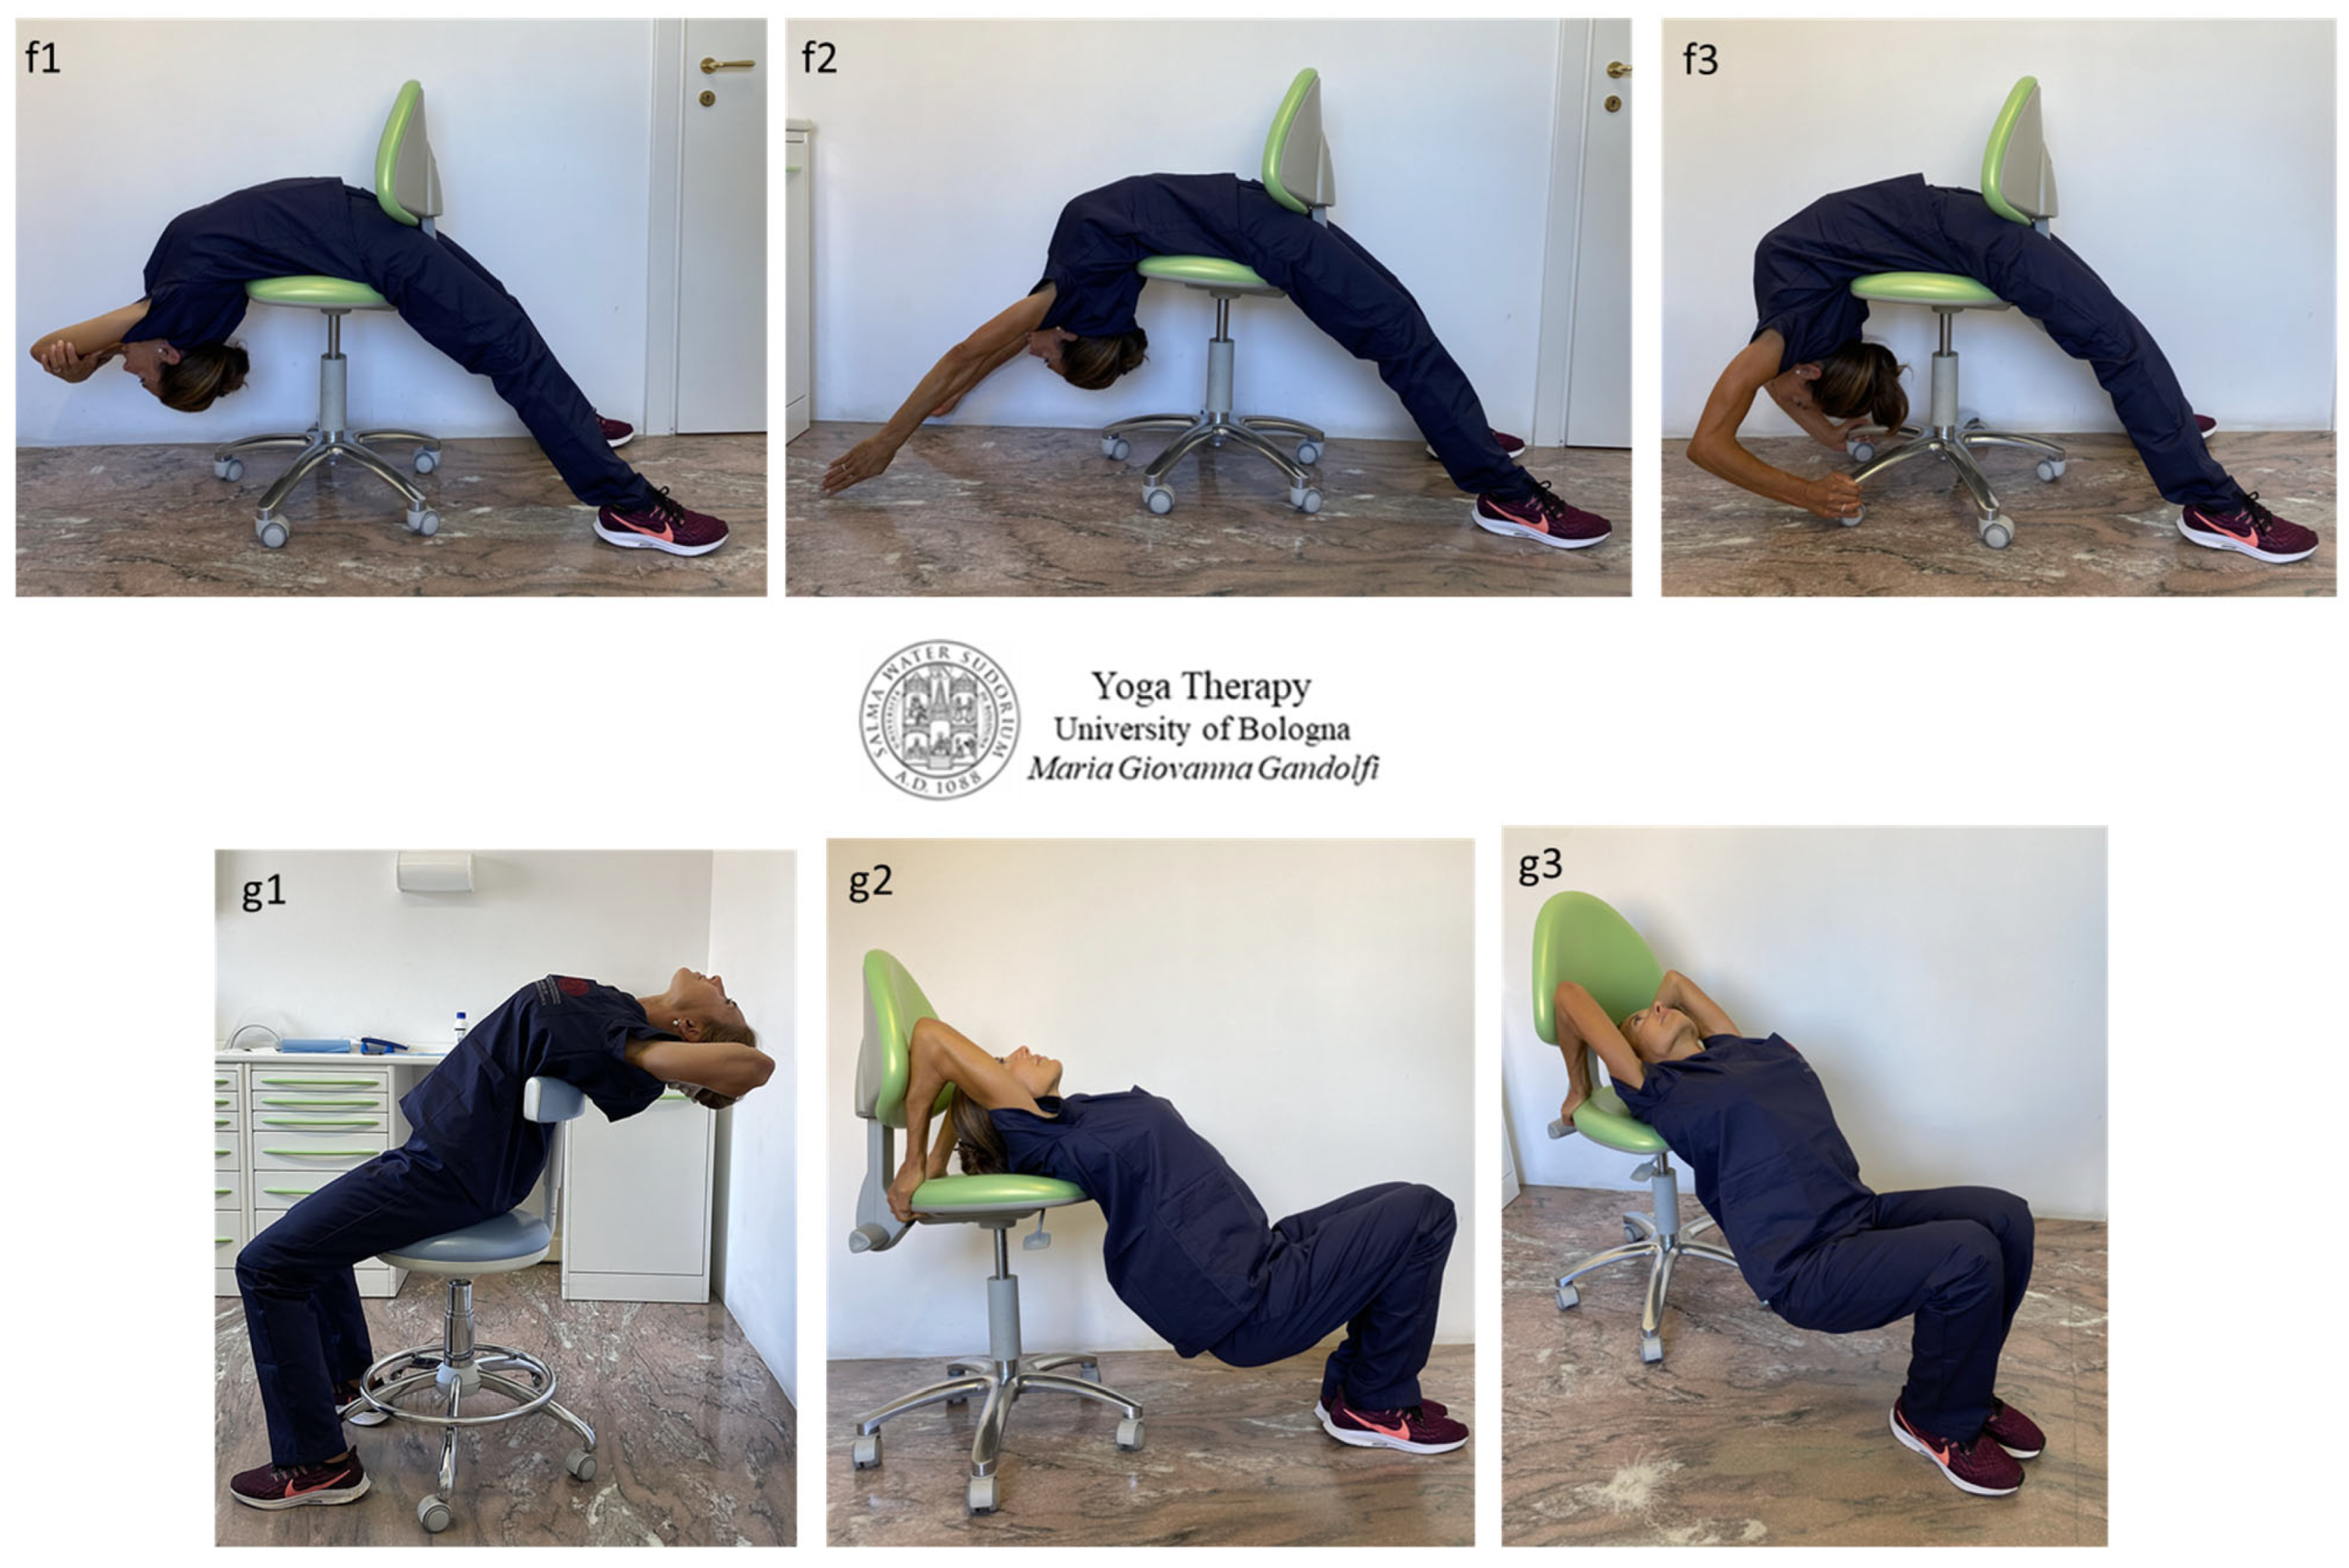 Thoracic spine mobility yoga poses | Thoracic spine mobility, Thoracic, Yoga  journal